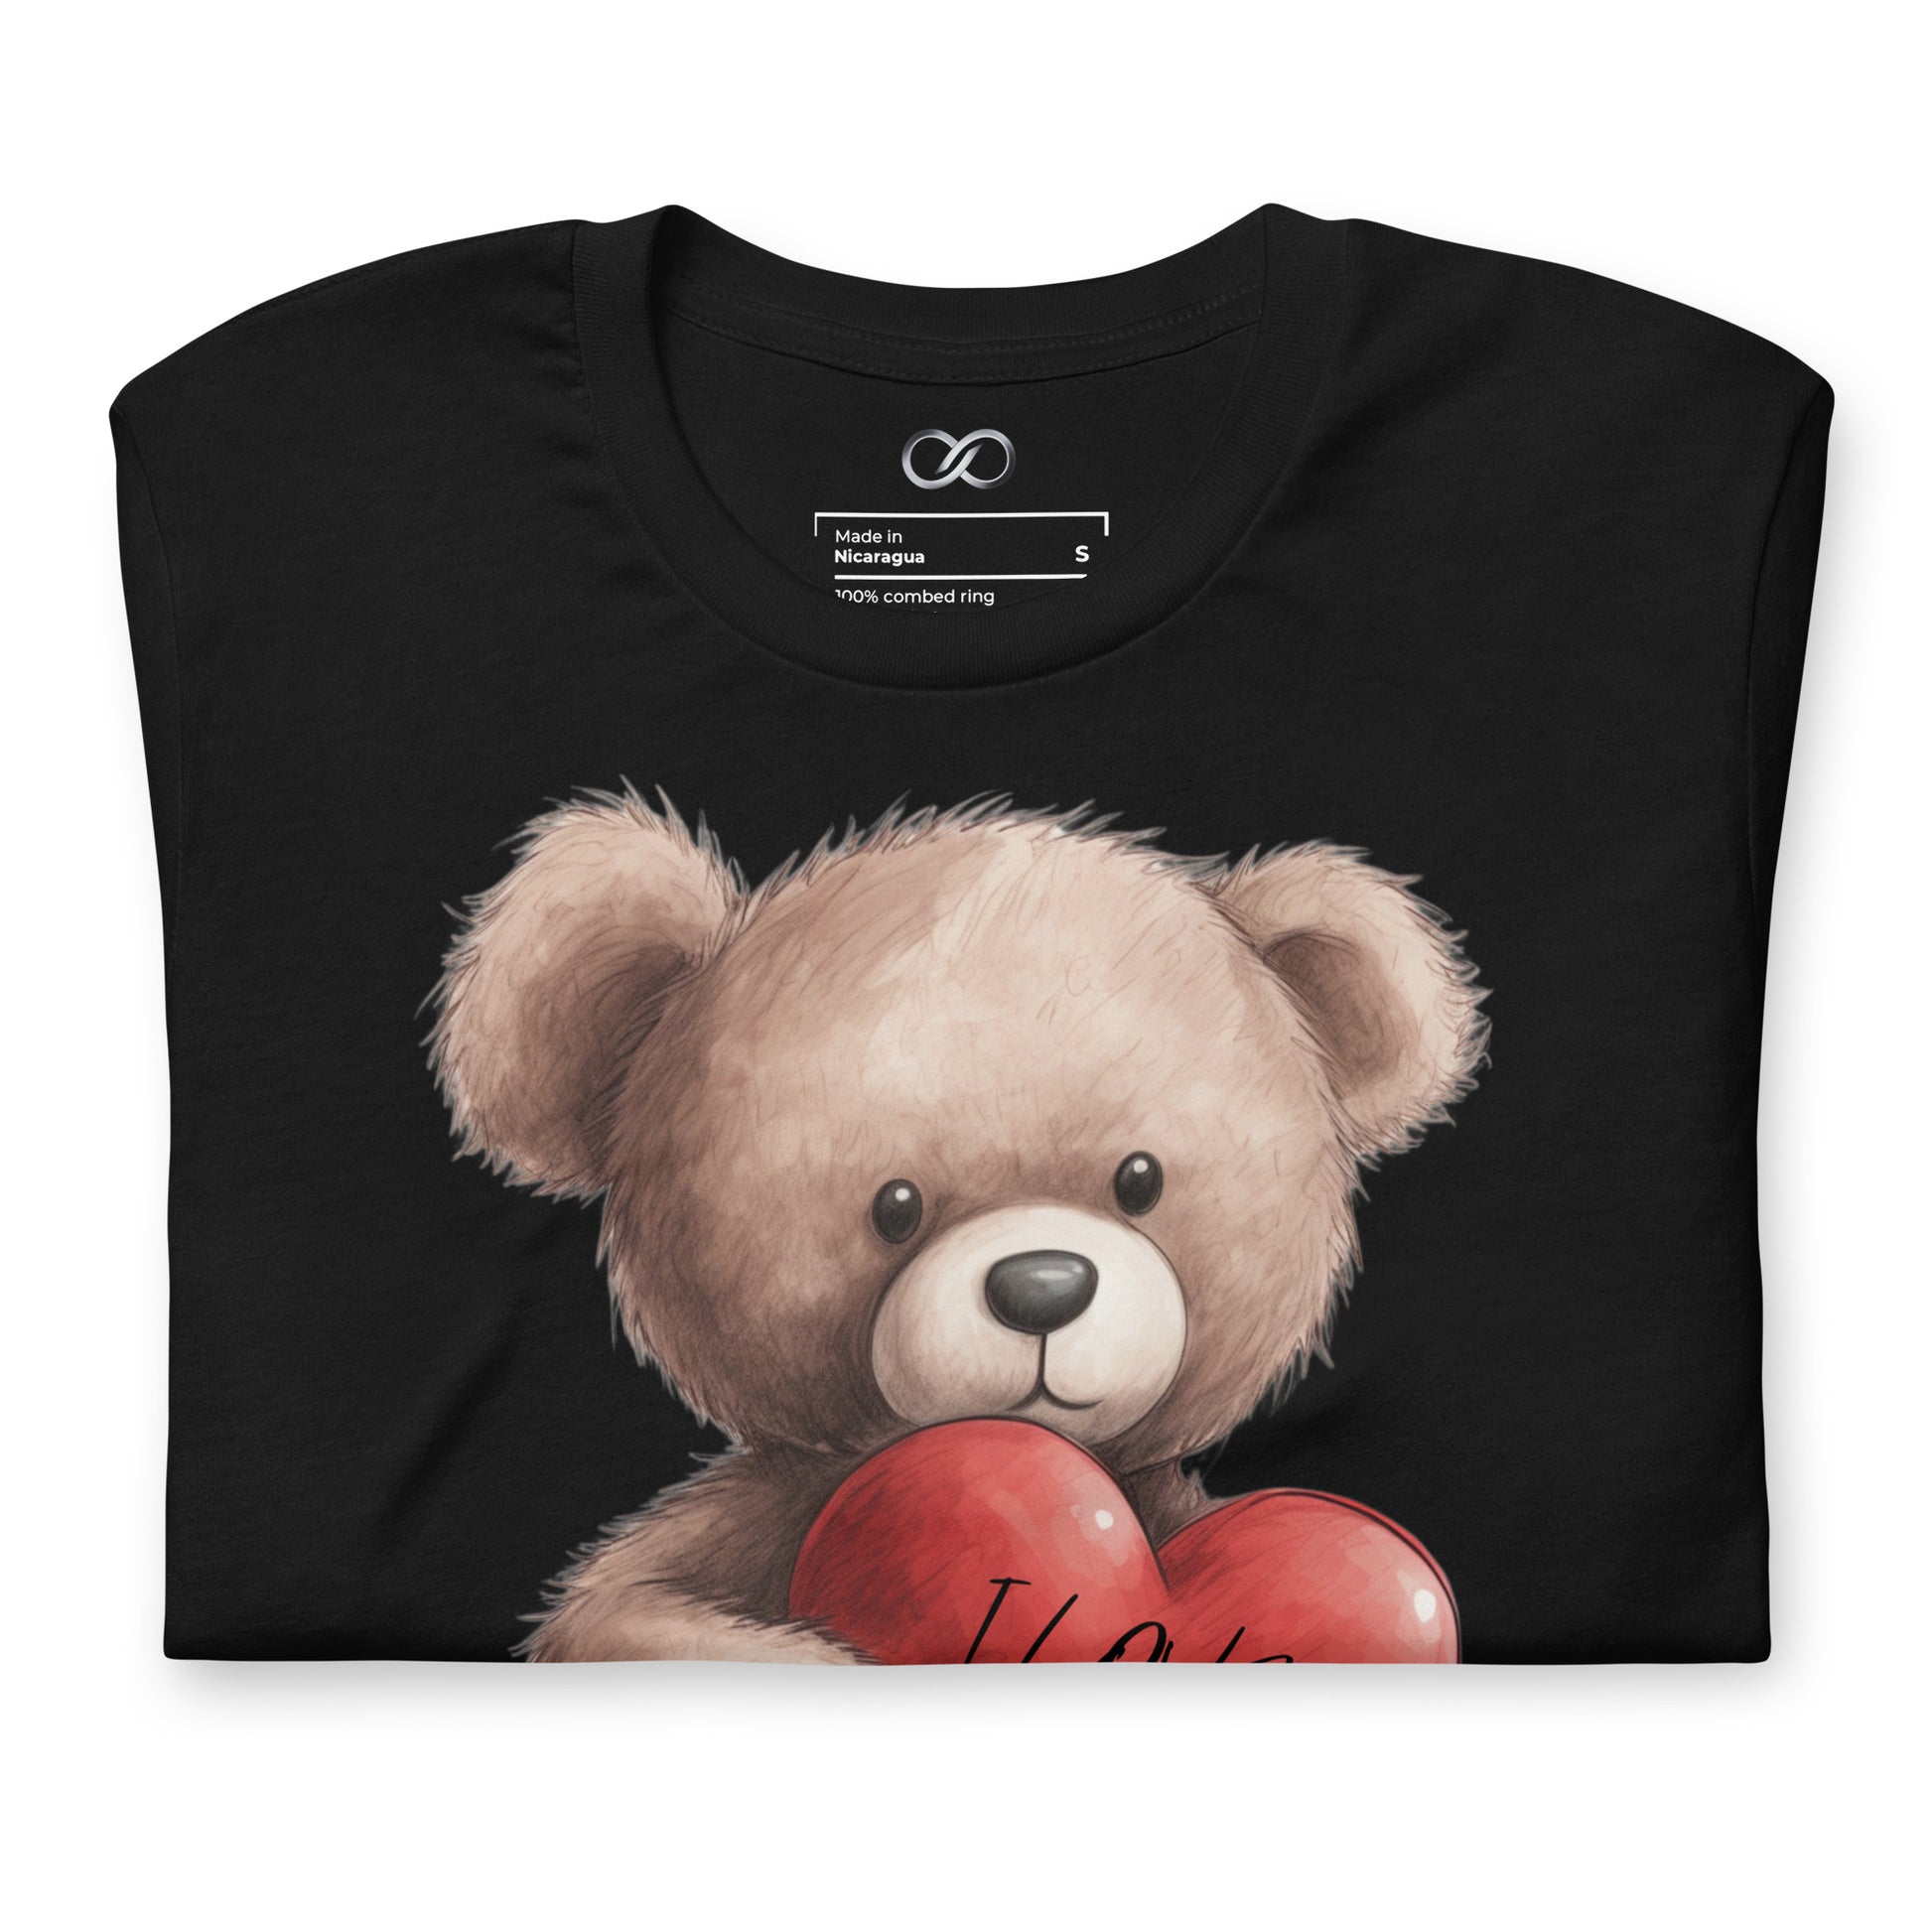 Close-up of a black t-shirt with a detailed graphic of a teddy bear holding a red heart with 'I Love You' written on it, set against a black fabric background.